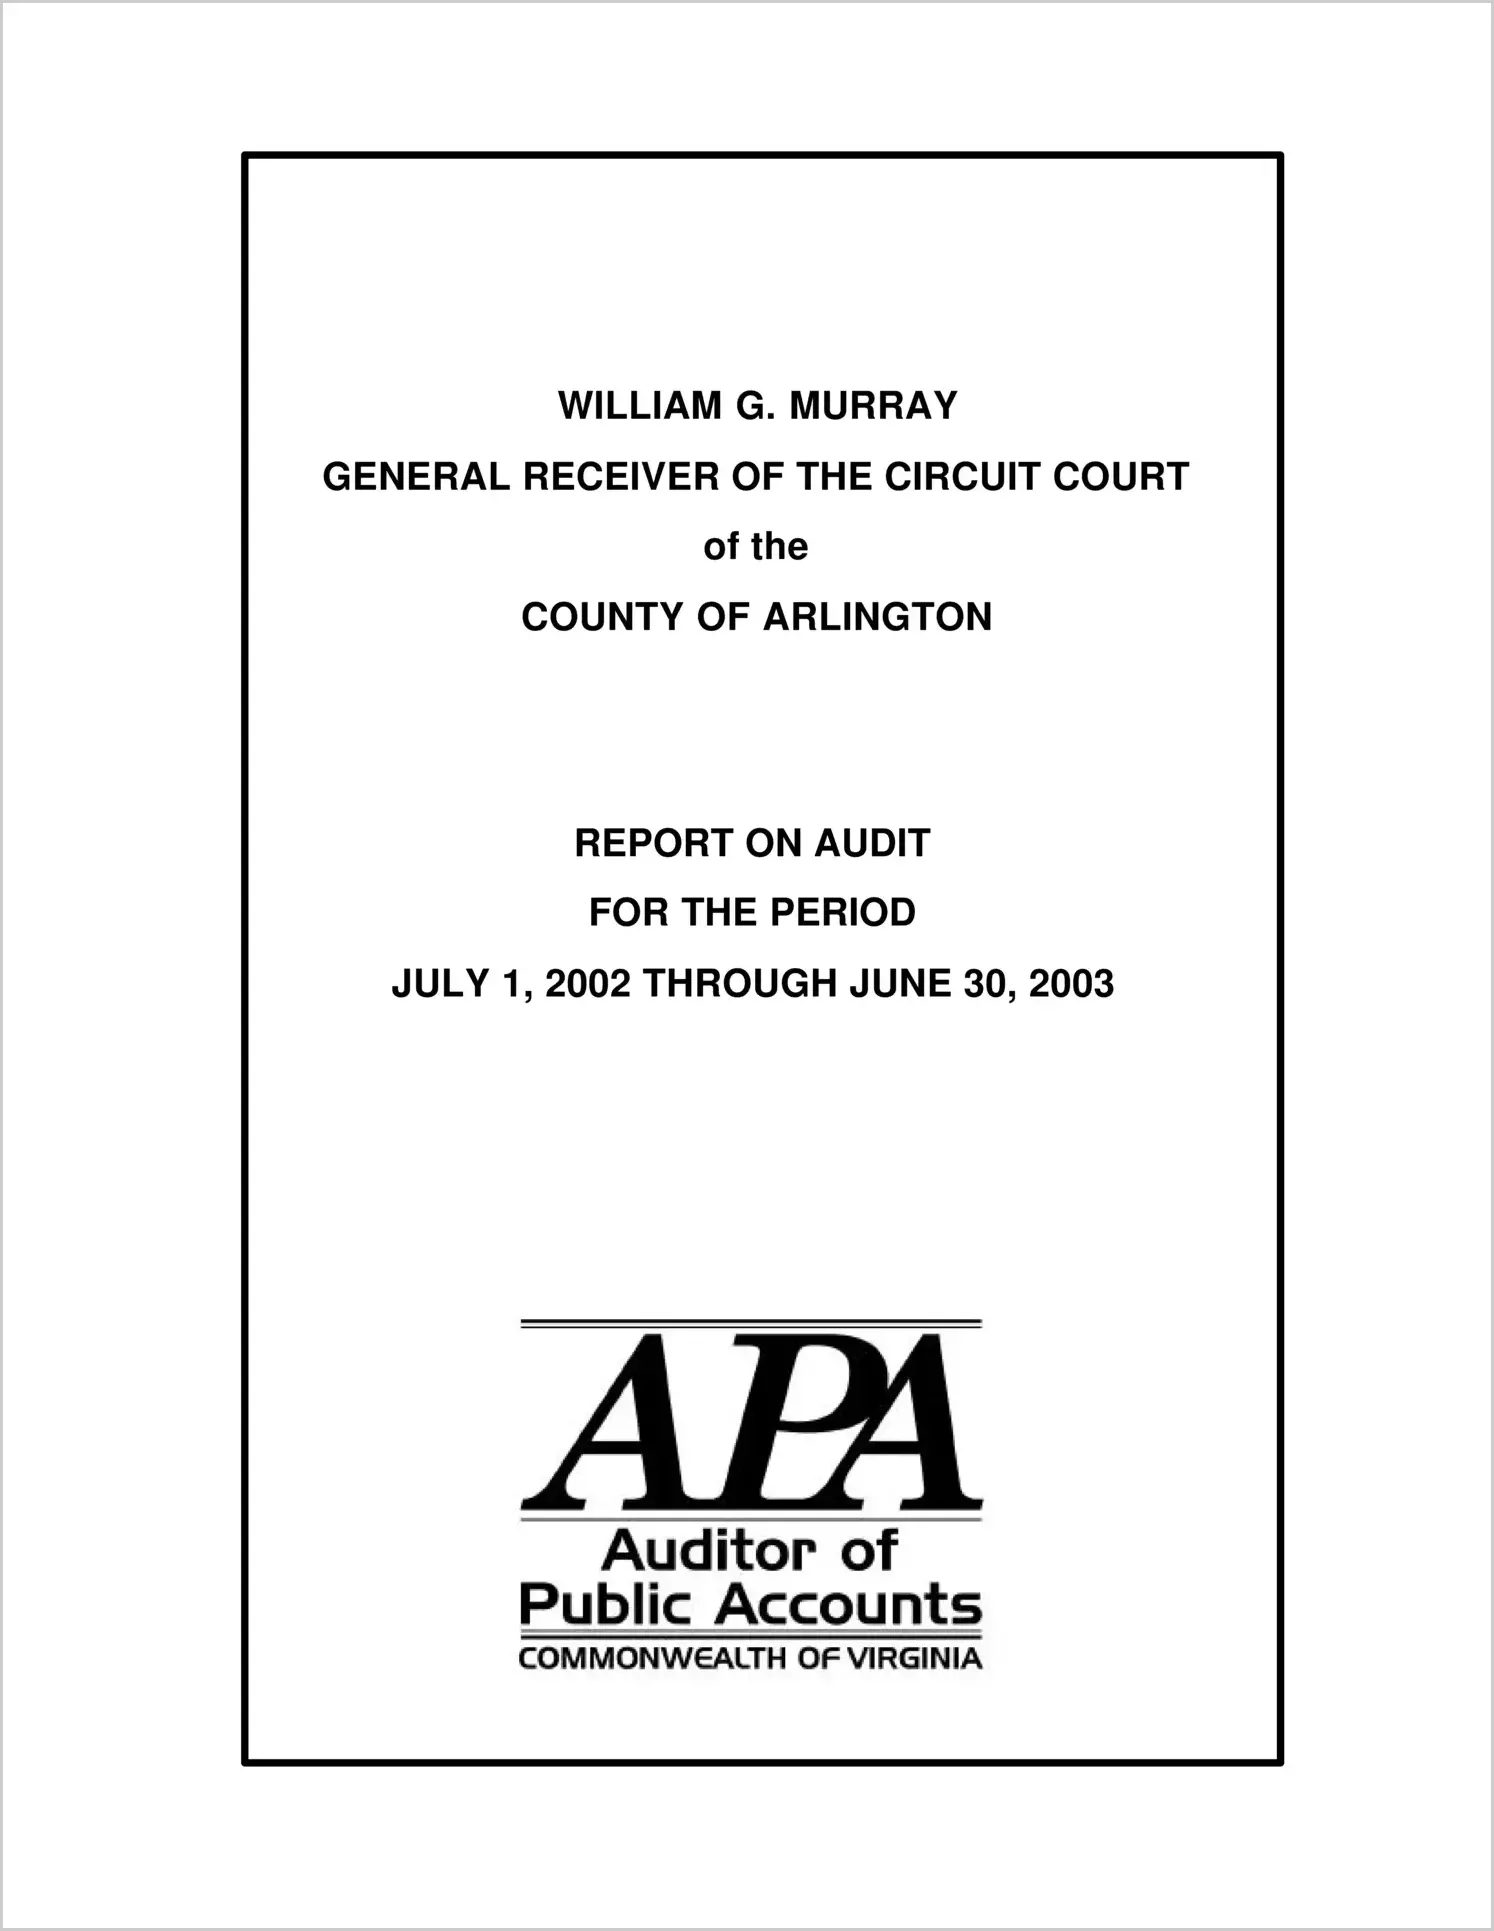 General Receiver of the Circuit Court of the County of Arlington for the period July 1, 2002 through June 30, 2003